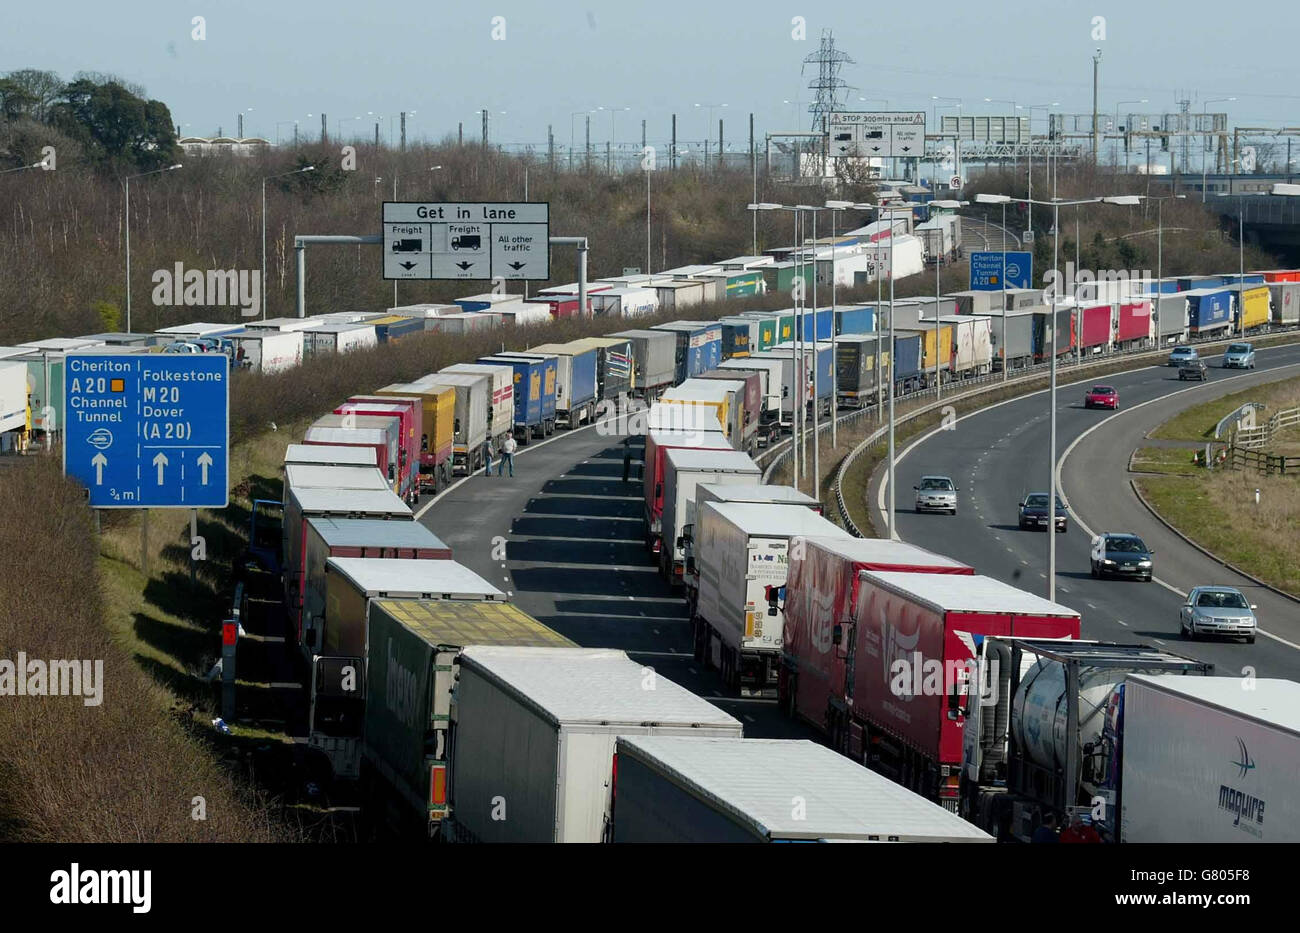 Trucks queue along the M20 near Folkestone in Kent as part of Operation Stack as travel across the Channel is disrupted due to industrial action at Calais, France. It was disclosed today that a record 2.2 million people will be heading abroad for Easter. Stock Photo